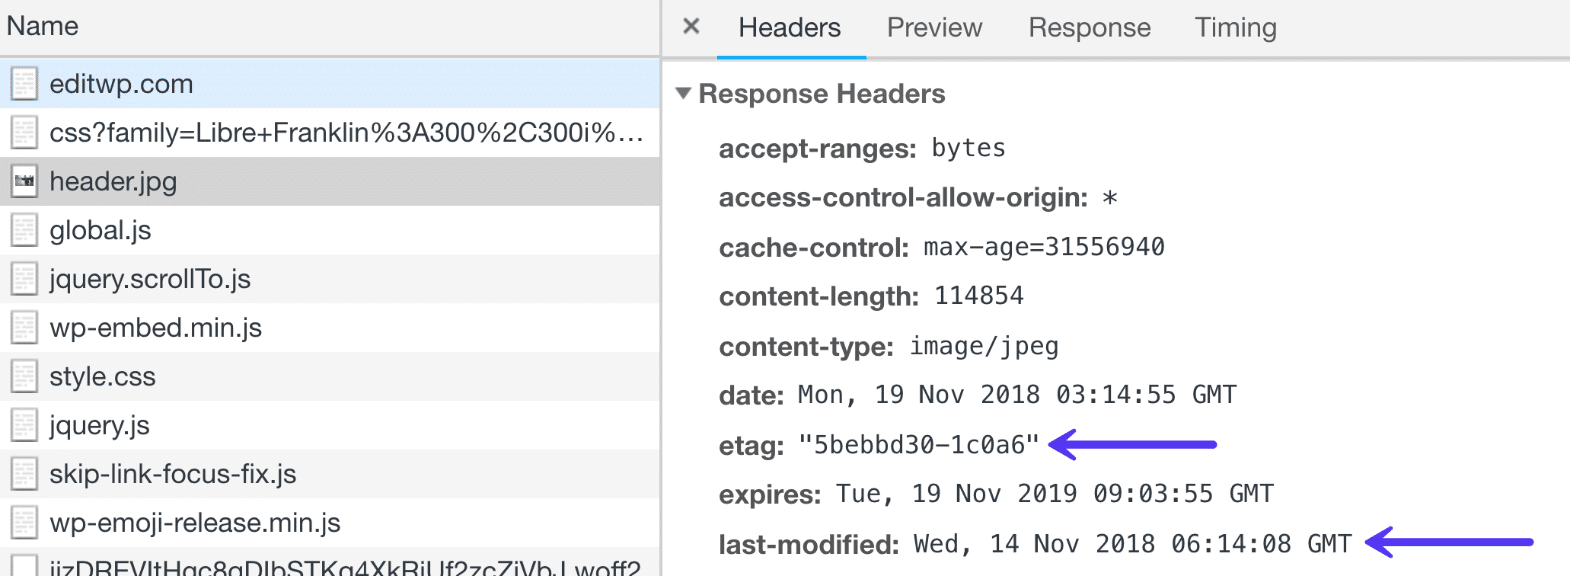 Last-modified and ETag HTTP headers" width="1570" height="576" srcset="http://webypress.fr/wp-content/uploads/2019/08/1566286026_839_Comment-accelerer-votre-site-WordPress-Guide-Ultimate-2019.png 1570w, https://kinsta.com/wp-content/uploads/2018/11/validate-cache-http-headers-300x110.png 300w, https://kinsta.com/wp-content/uploads/2018/11/validate-cache-http-headers-768x282.png 768w, https://kinsta.com/wp-content/uploads/2018/11/validate-cache-http-headers-1024x376.png 1024w, https://kinsta.com/wp-content/uploads/2018/11/validate-cache-http-headers-610x224.png 610w" sizes="(max-width: 1570px) 100vw, 1570px